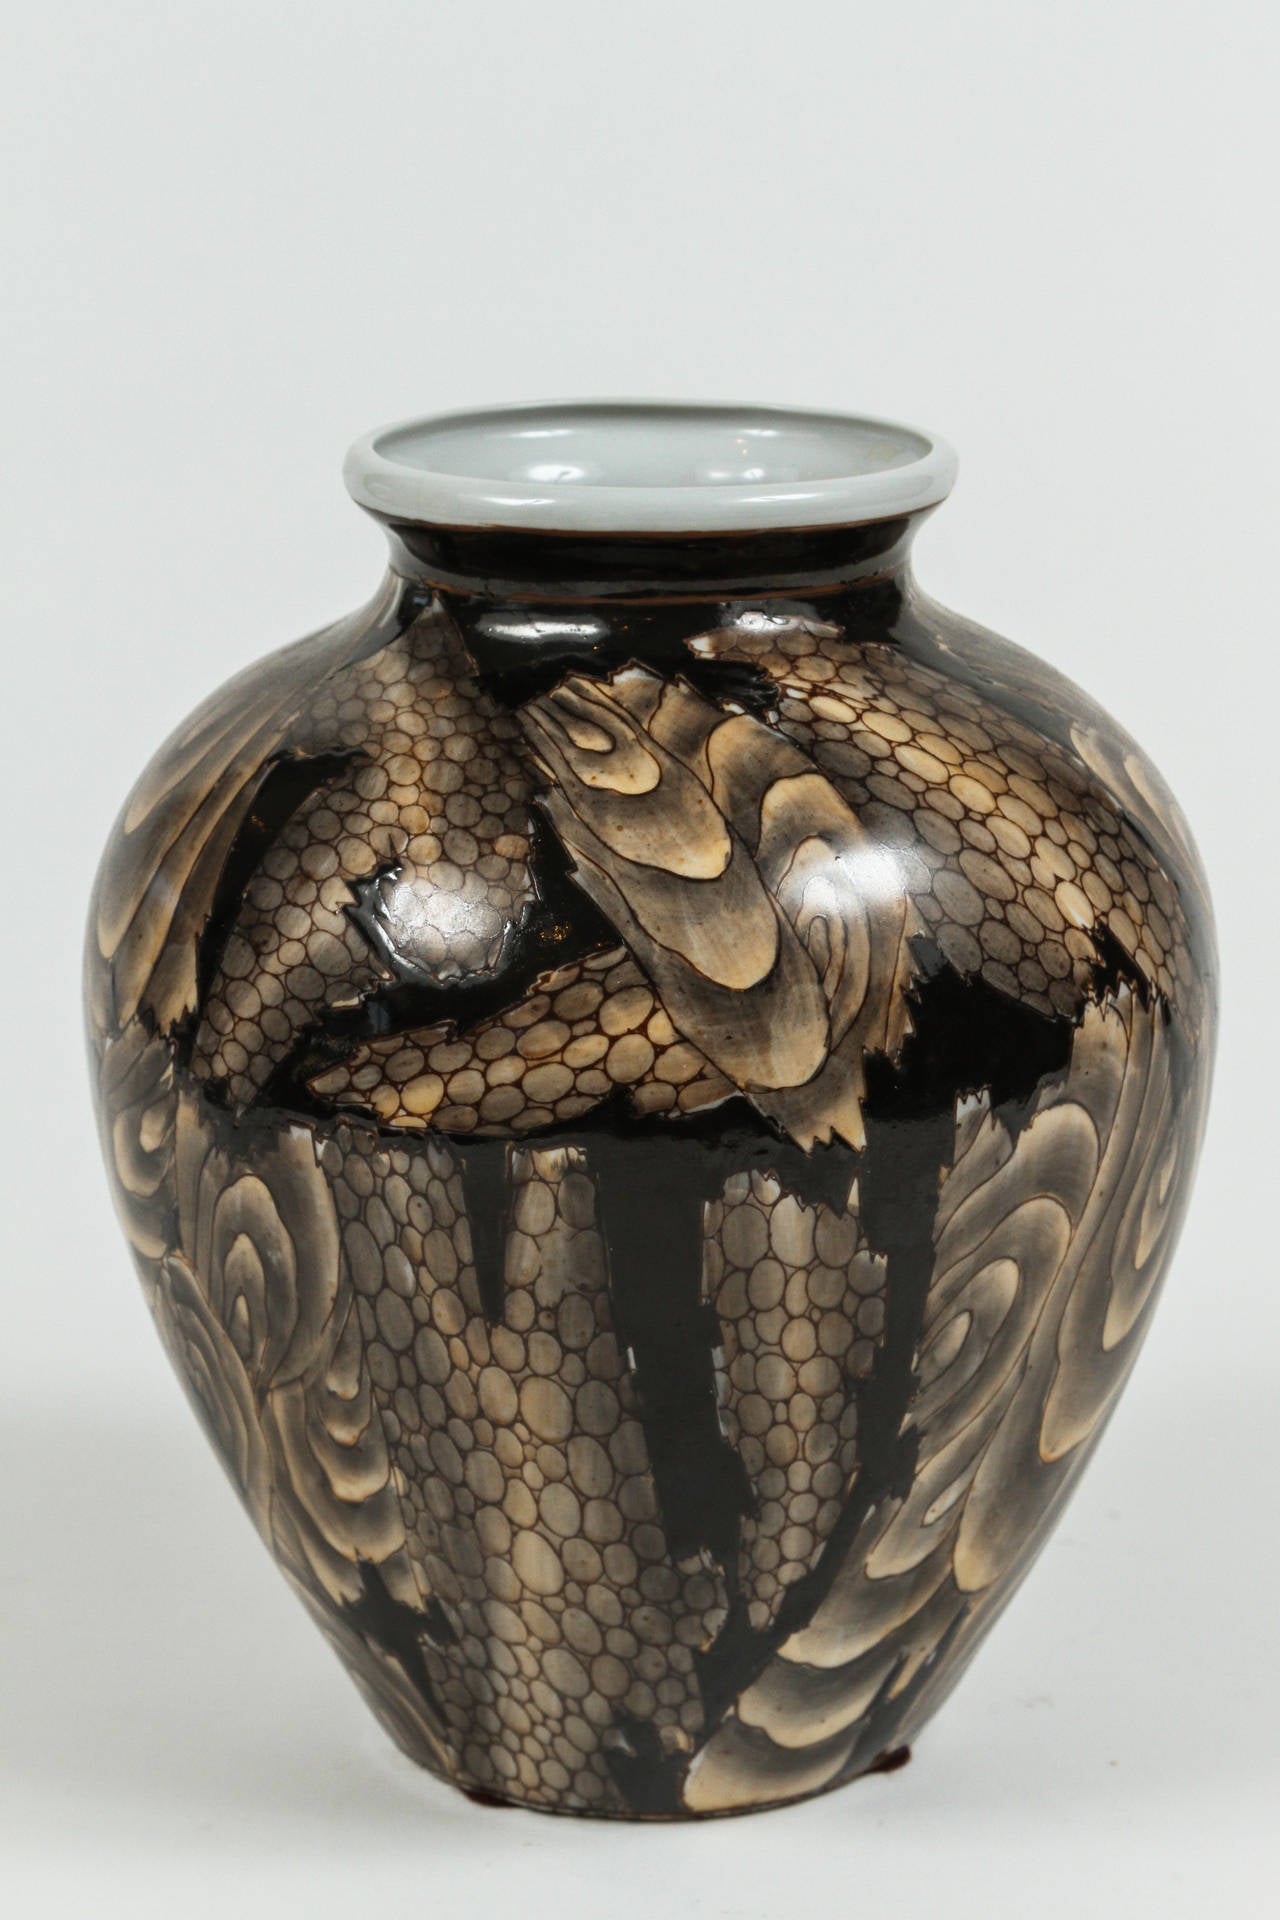 Very unique Japanese vase with abstract pattern in a variety of brown tones. The deepest brown glaze is raised, giving the vase a wonderful tactile texture.